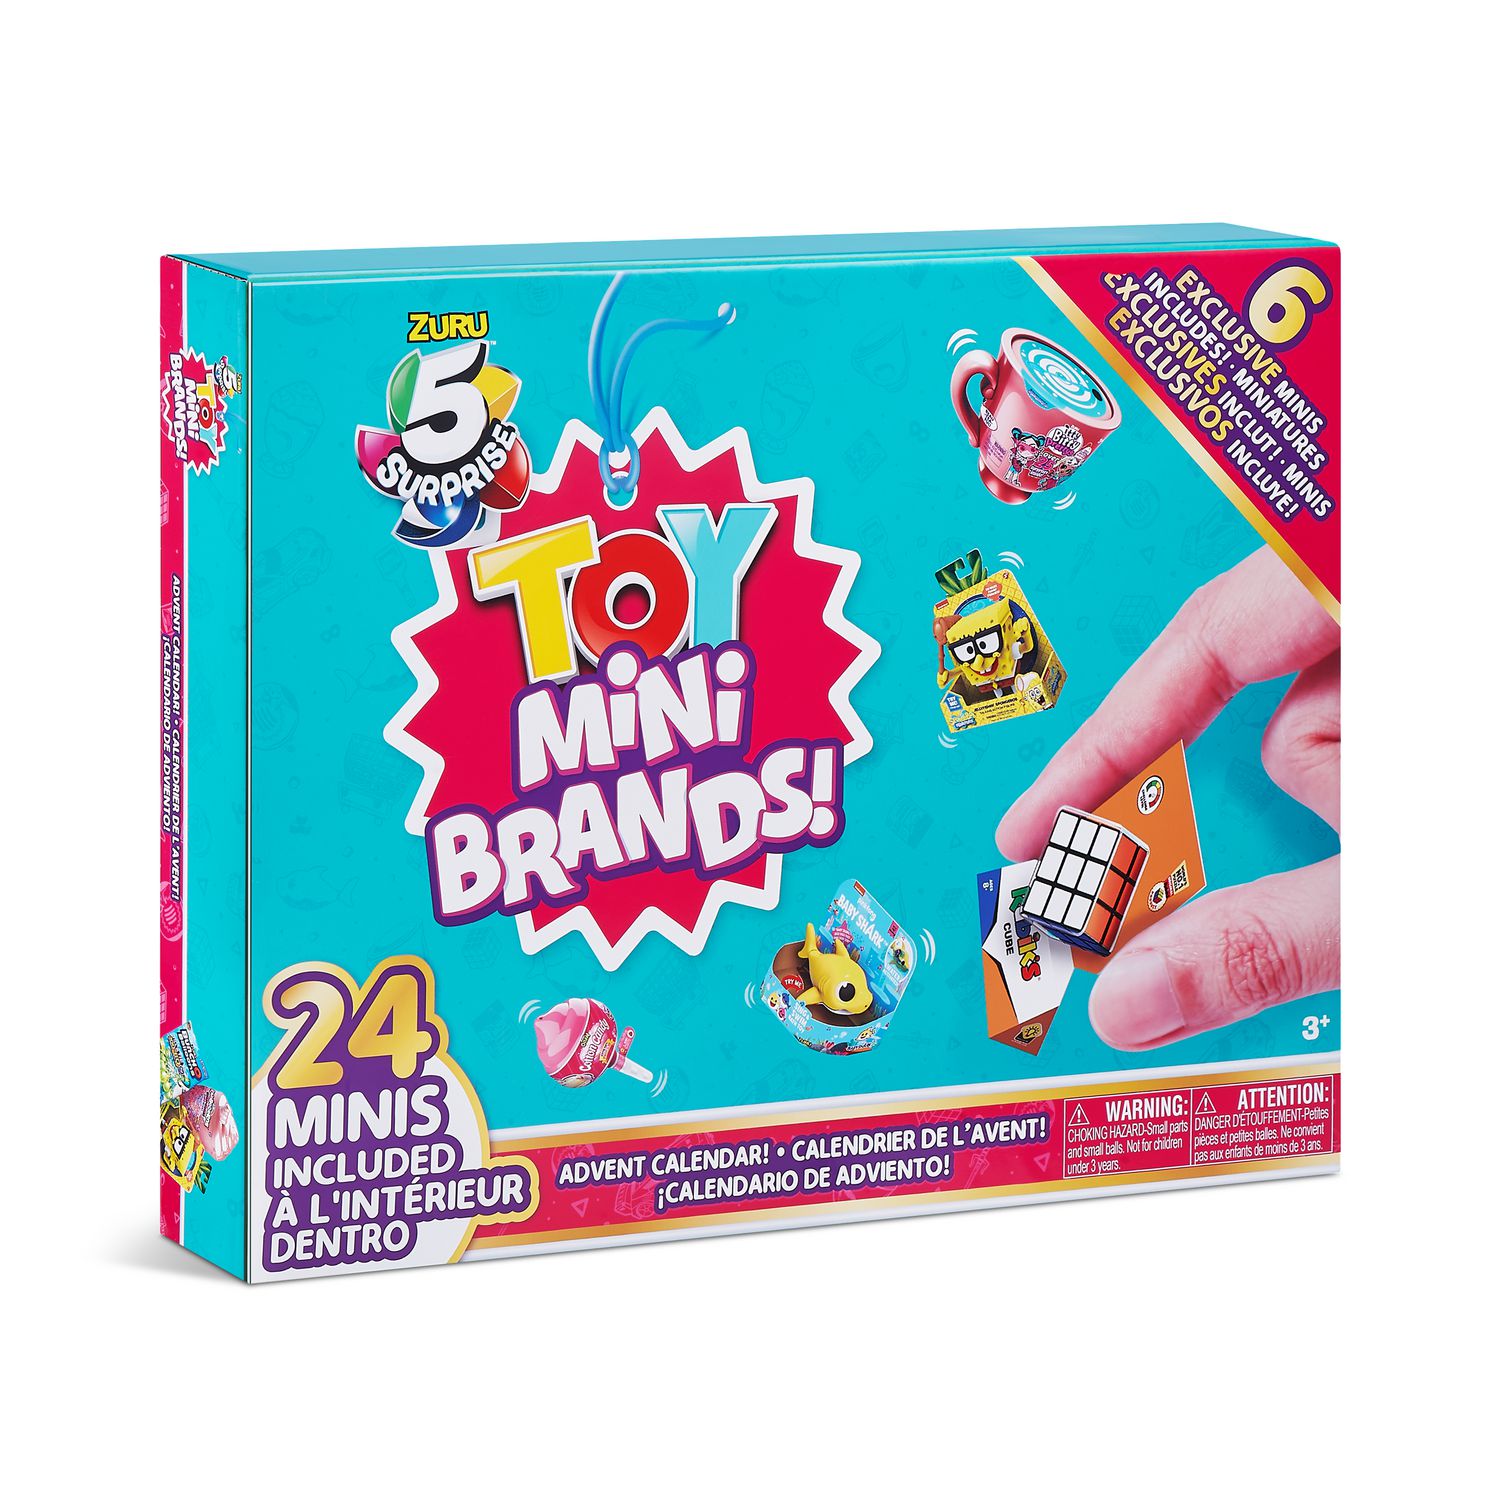 The mini brands advent calendar is 50% off is it worth getting 2 or does it  come with a specific set of minis? : r/MiniBrands